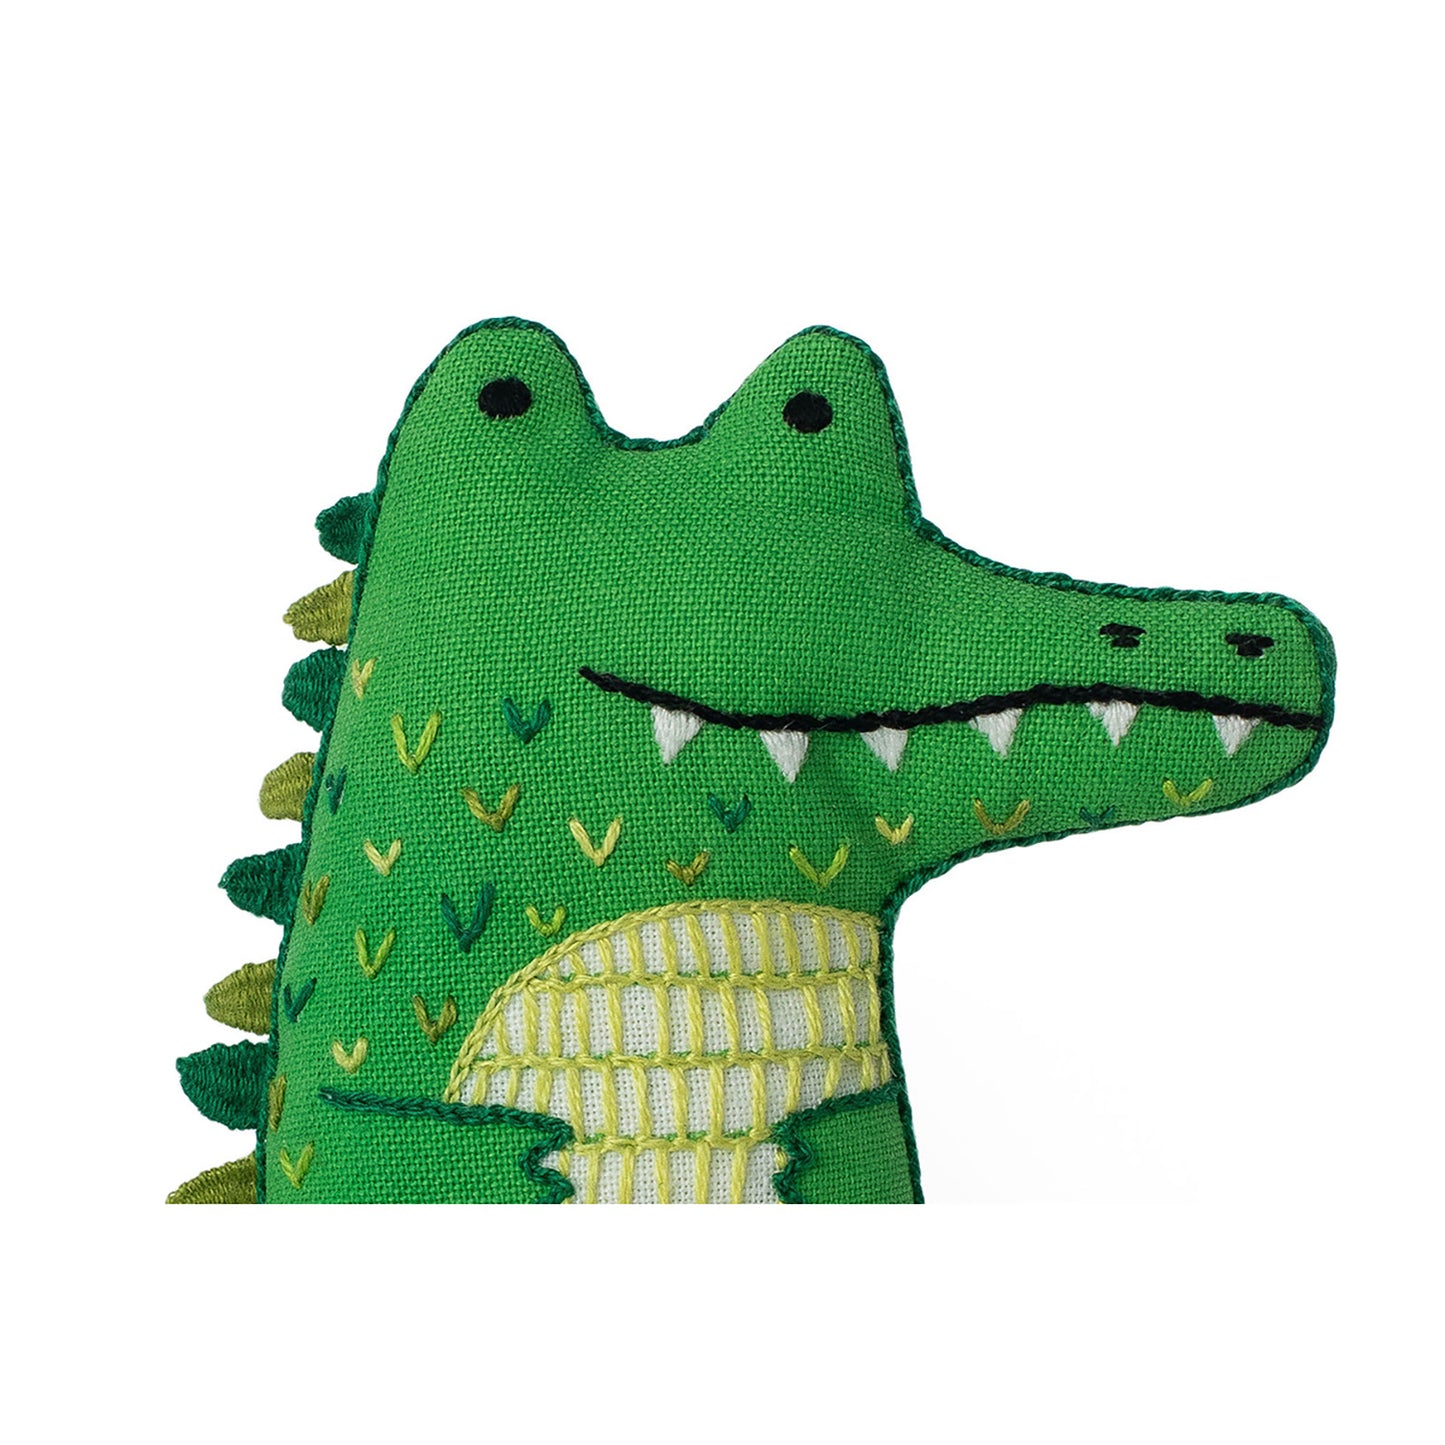 D.I.Y. Embroidered Doll Kit - Alligator Alternative View #1